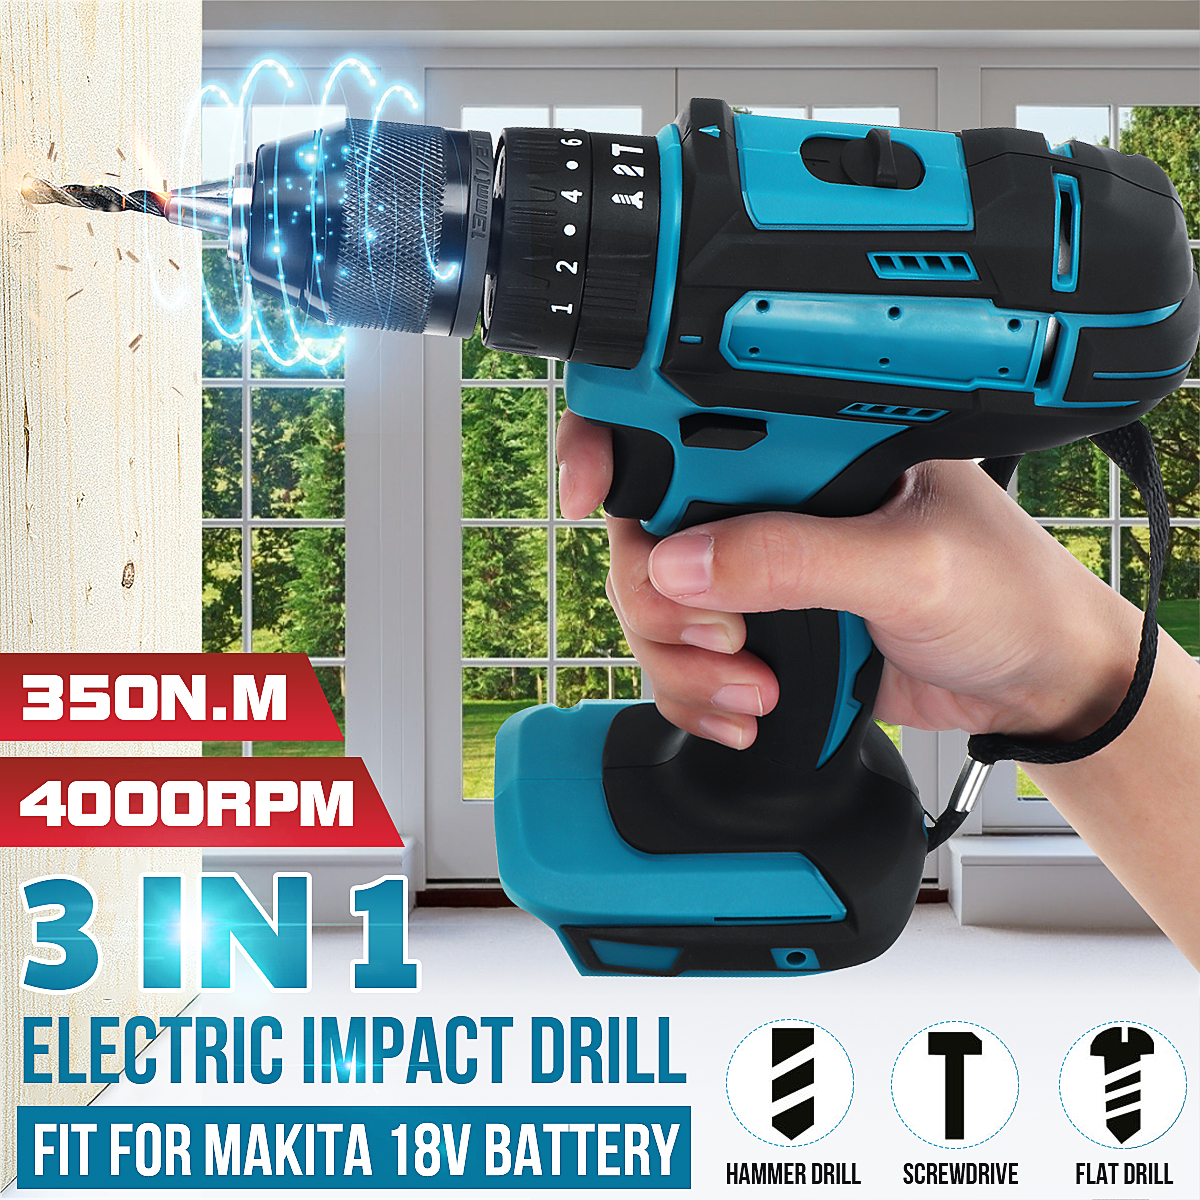 10mm-Chuck-Impact-Drill-350Nm-Cordless-Electric-Drill-For-Makita-18V-Battery-4000RPM-LED-Light-Power-1642853-1